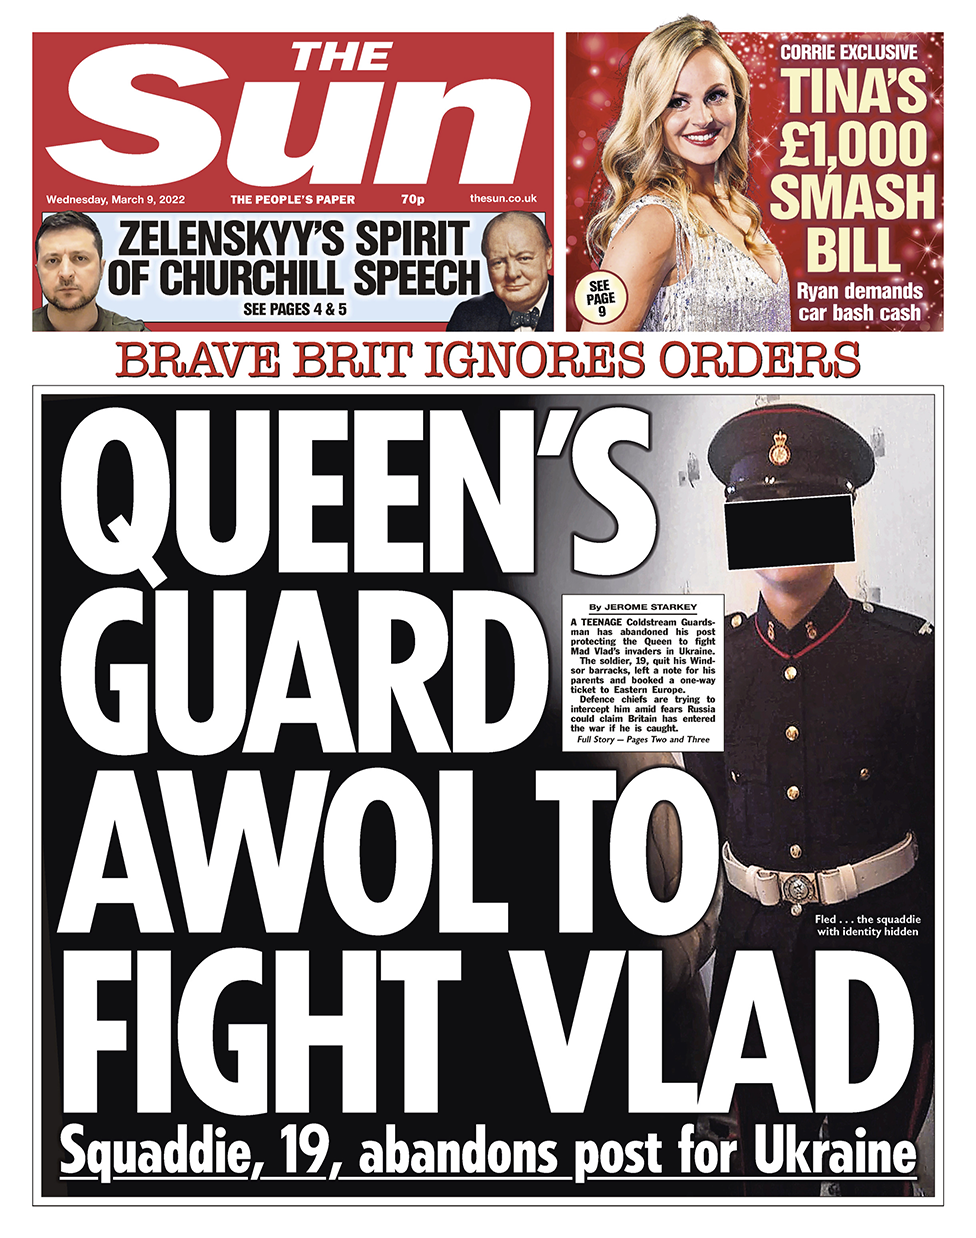 A member of the Queen's guard who has reportedly gone to join the fighting in Ukraine is shown with his face blanked out